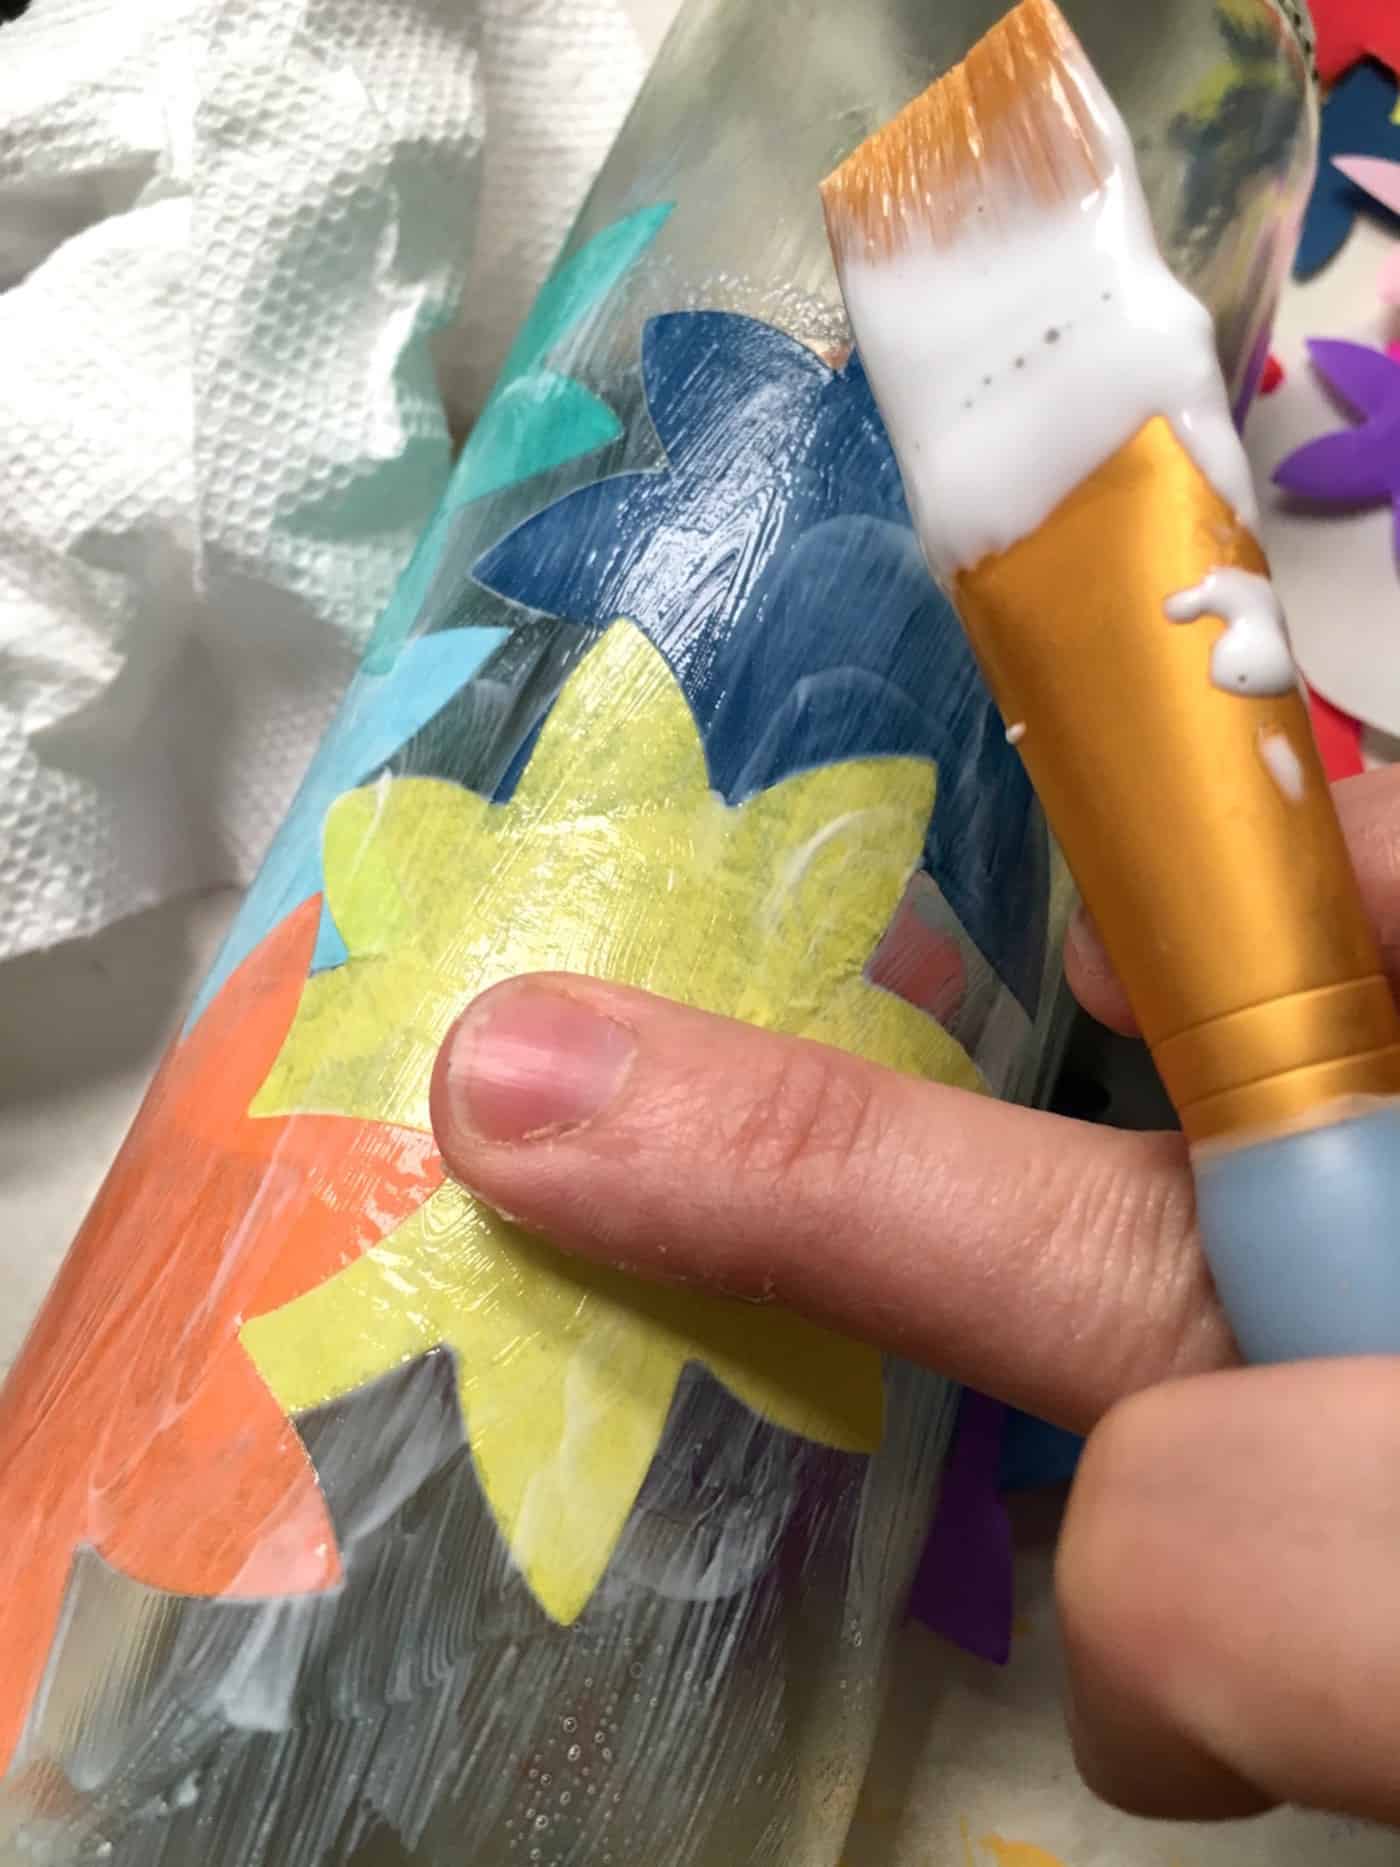 Finger smoothing tissue paper shapes down onto the bottle